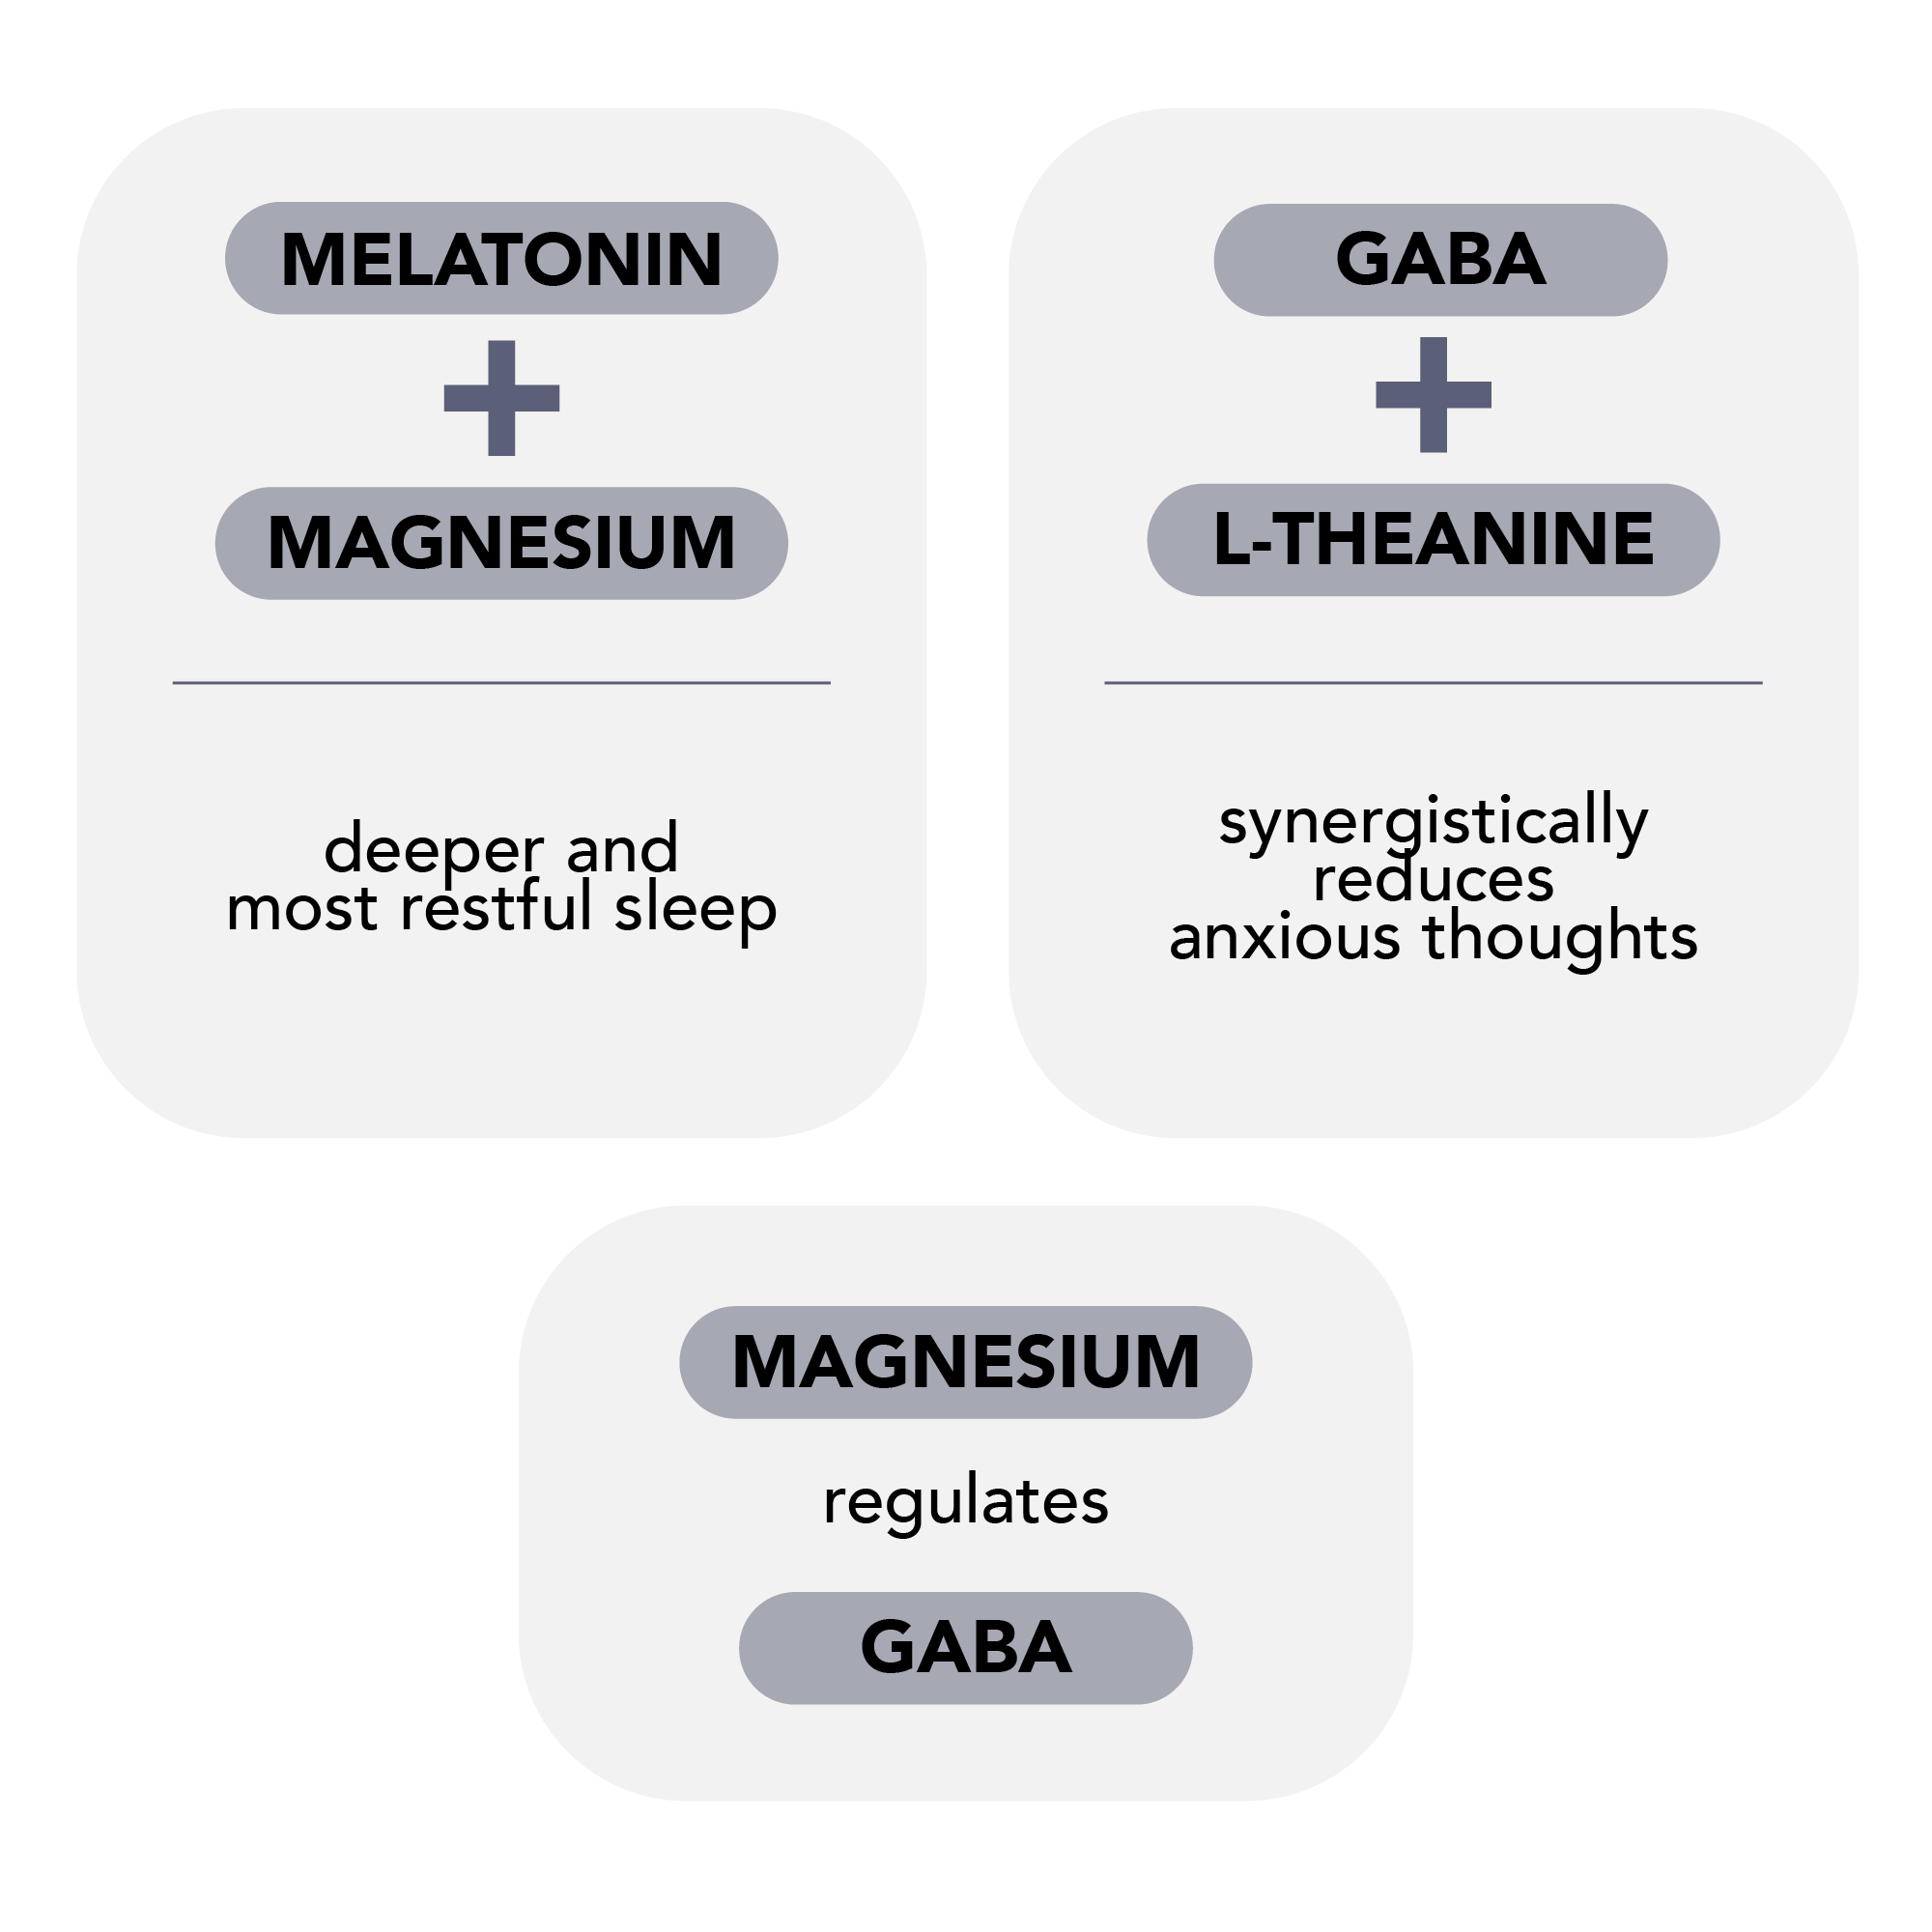 List of Synergistic Interactions between ingredients in a bottle of Better Sleep by Synergic Supplements. Melatonin and Magnesium together promote a deeper and more restful sleep, while GABA and L-Theanine synergistically reduce anxious thoughts, while magnesium helps to regulate GABA. 